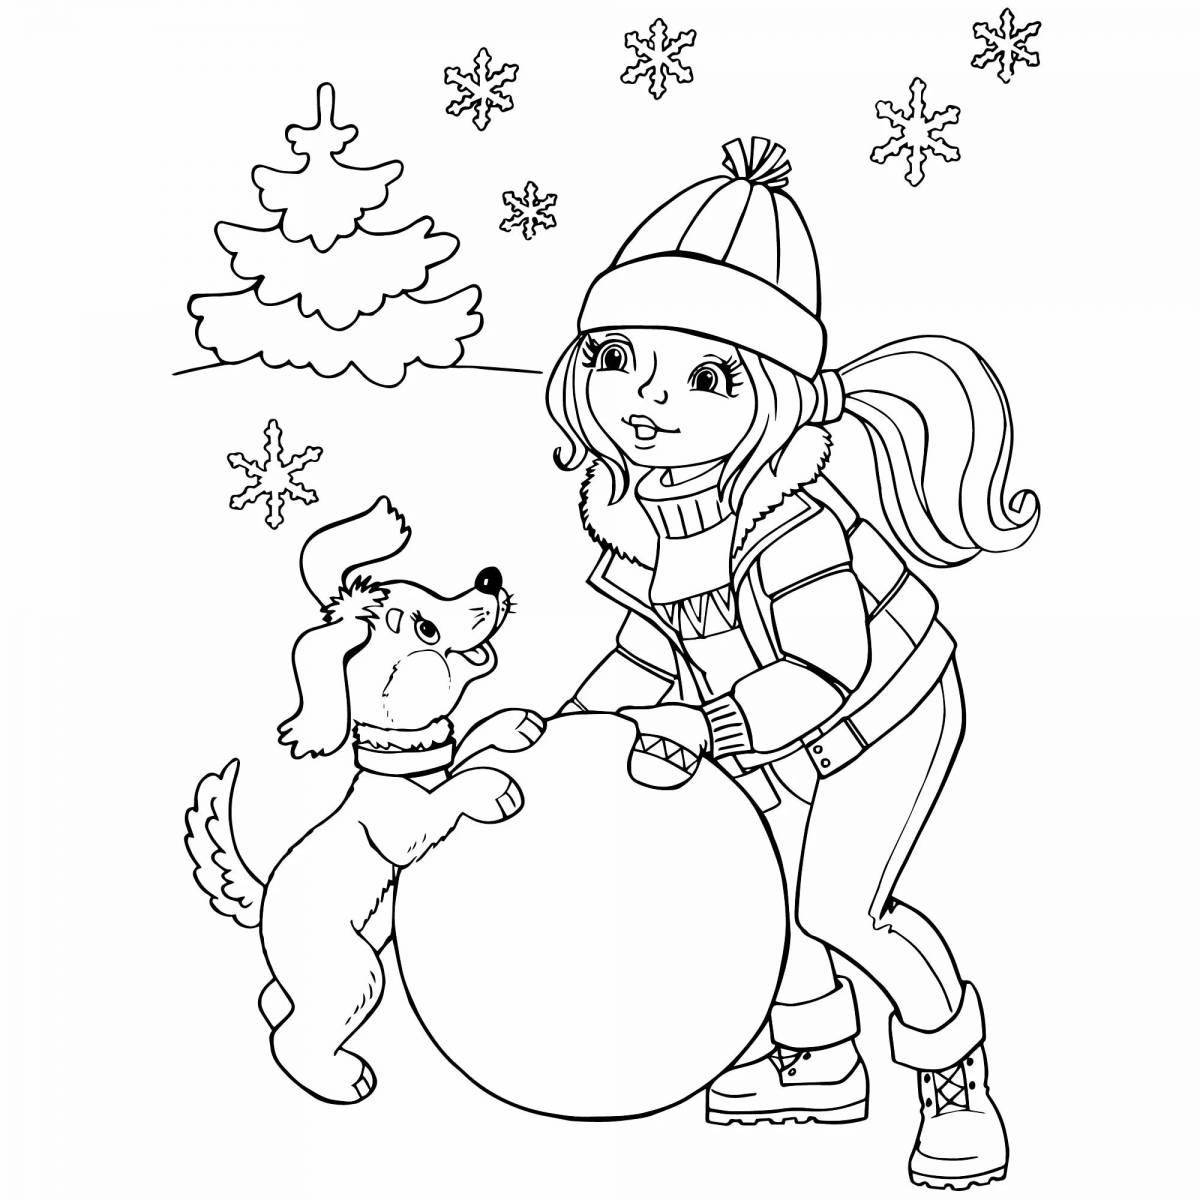 Chic New Year's coloring book for a 6 year old girl